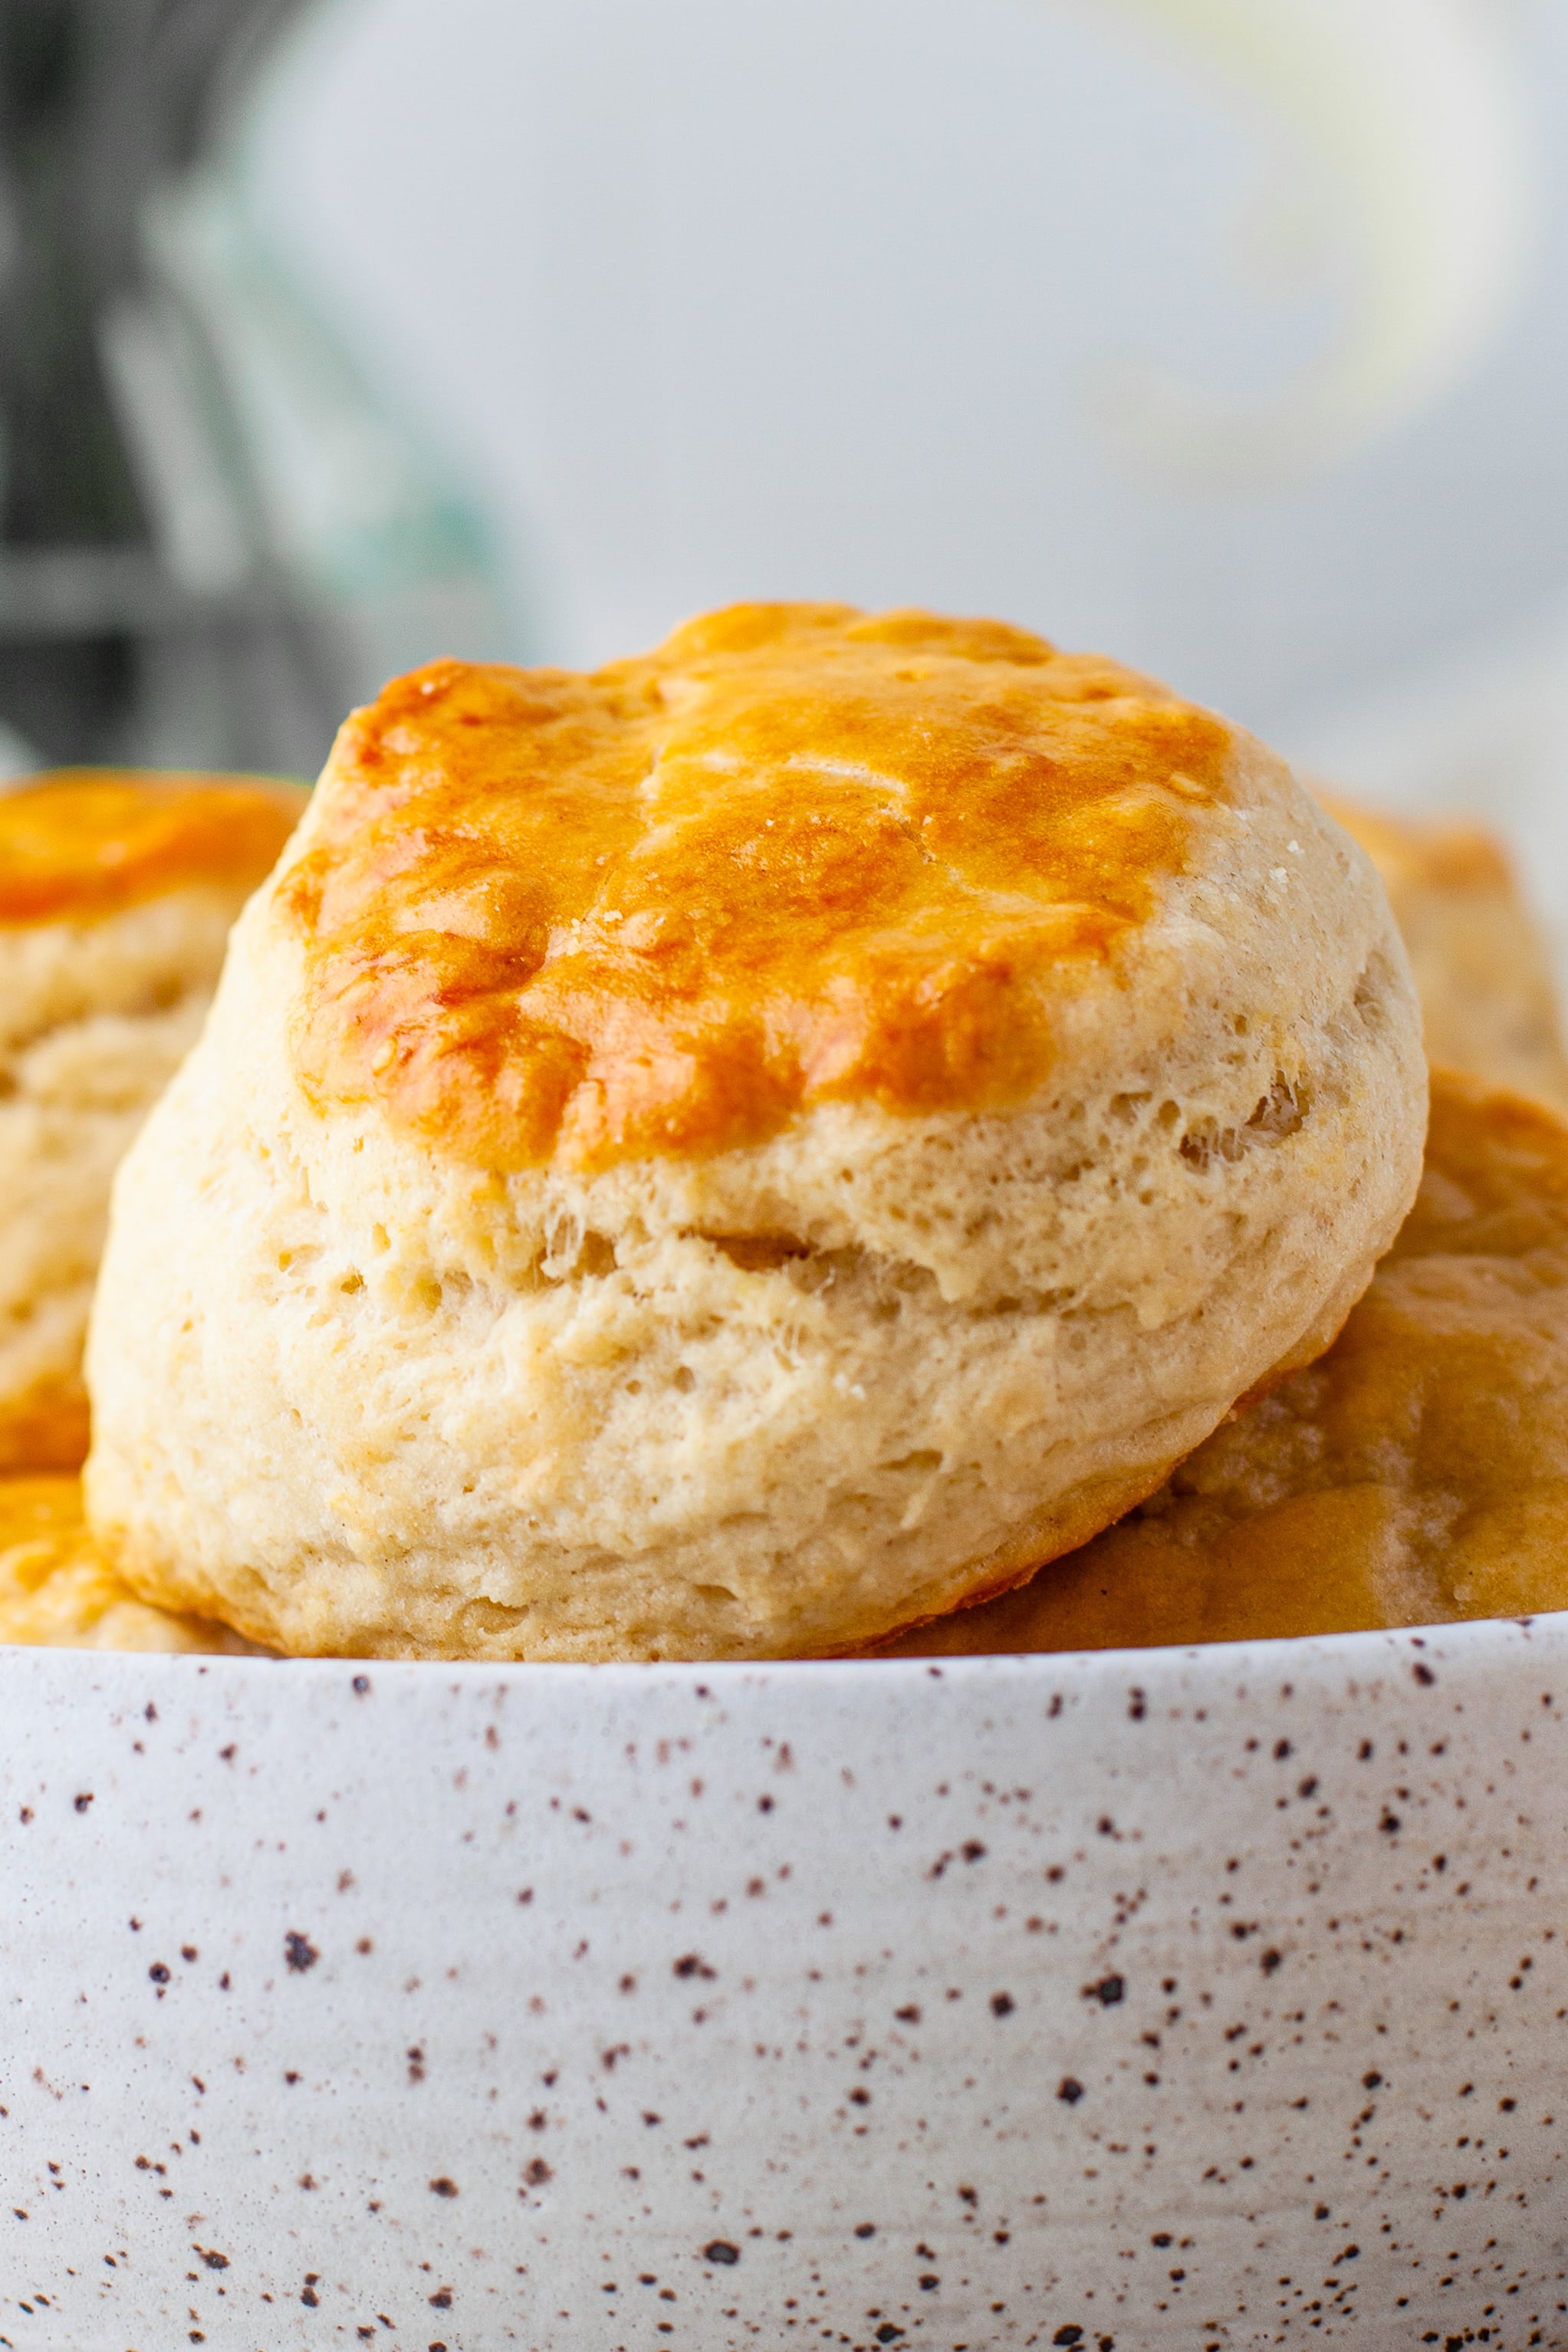 A biscuit with golden brown top sits on top of a bowl of biscuits.